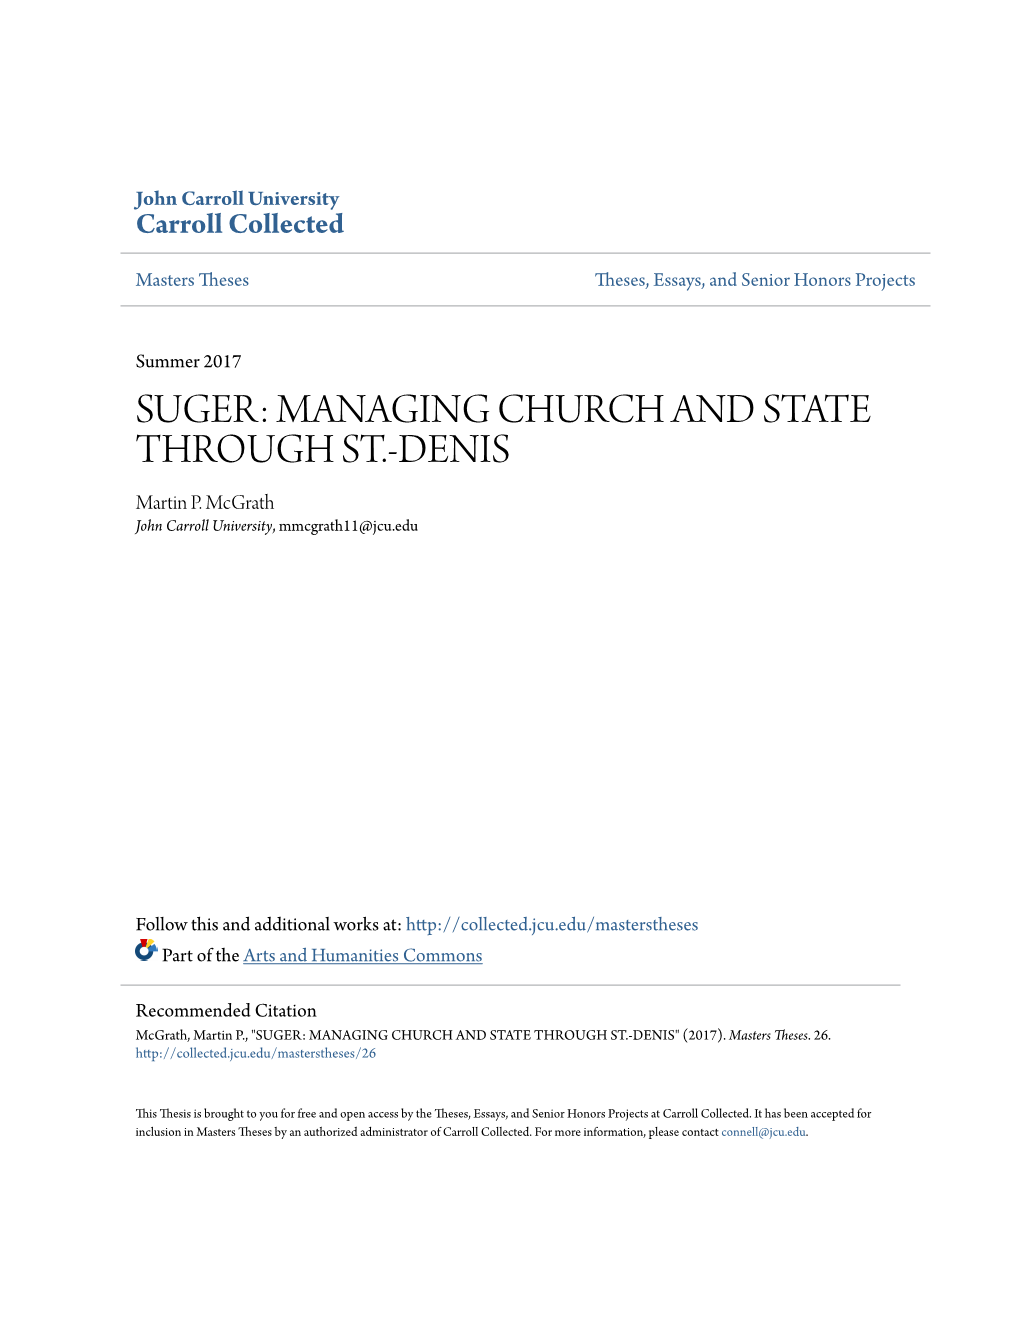 SUGER: MANAGING CHURCH and STATE THROUGH ST.-DENIS Martin P